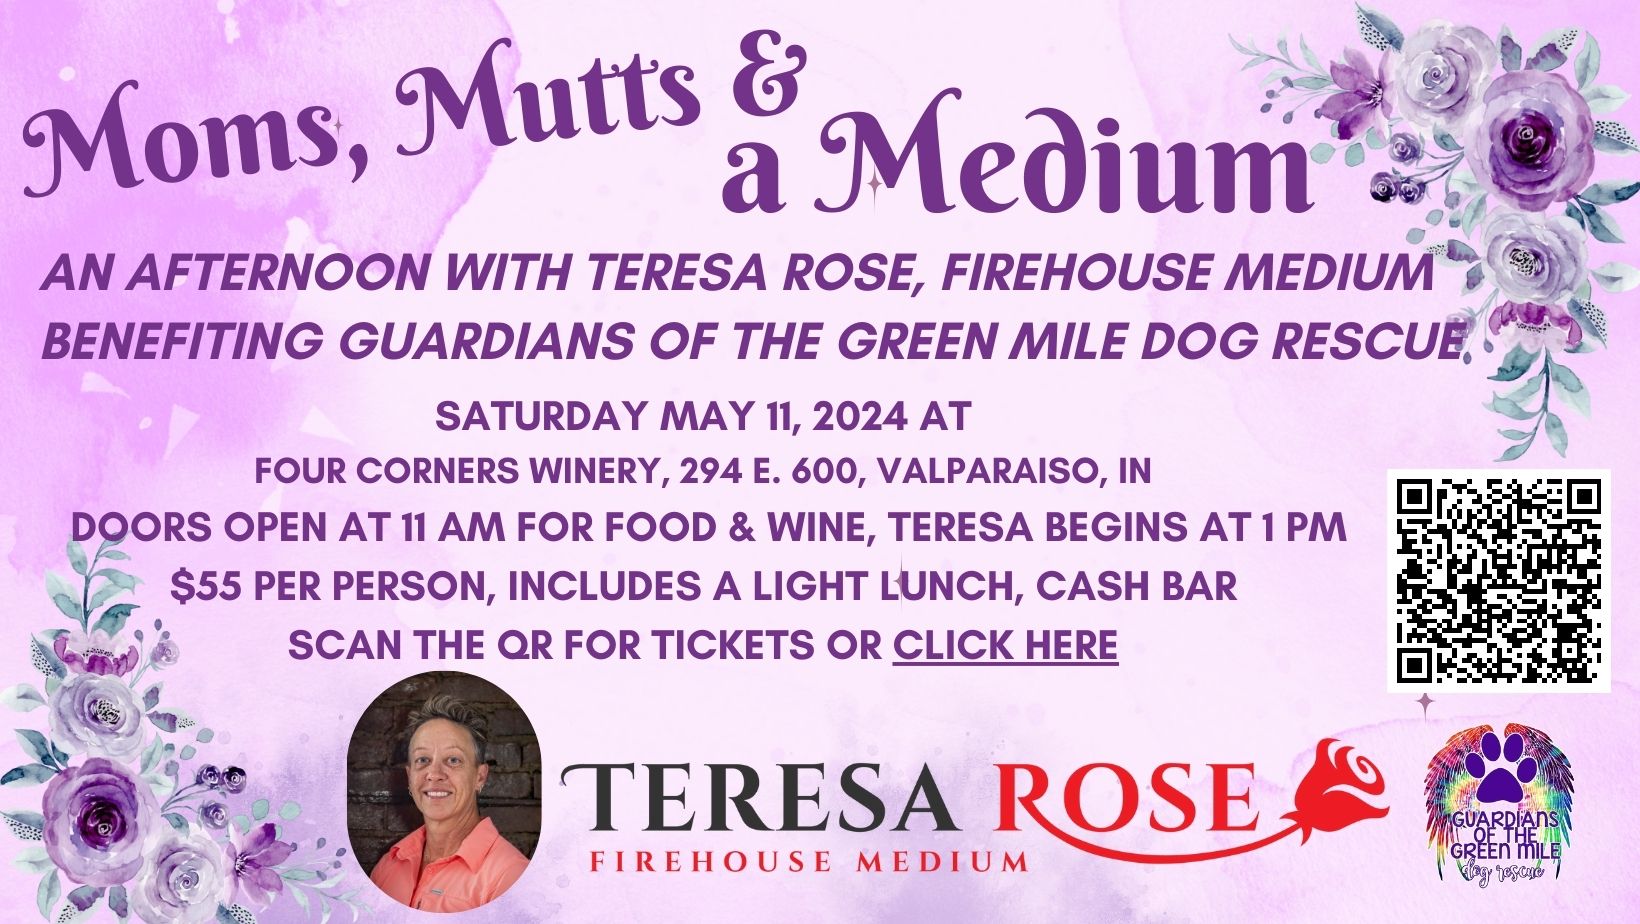 Moms, Mutts & A Medium - Teresa Rose Firehouse Medium benefiting Guardians of the Green Mile Dog Rescue